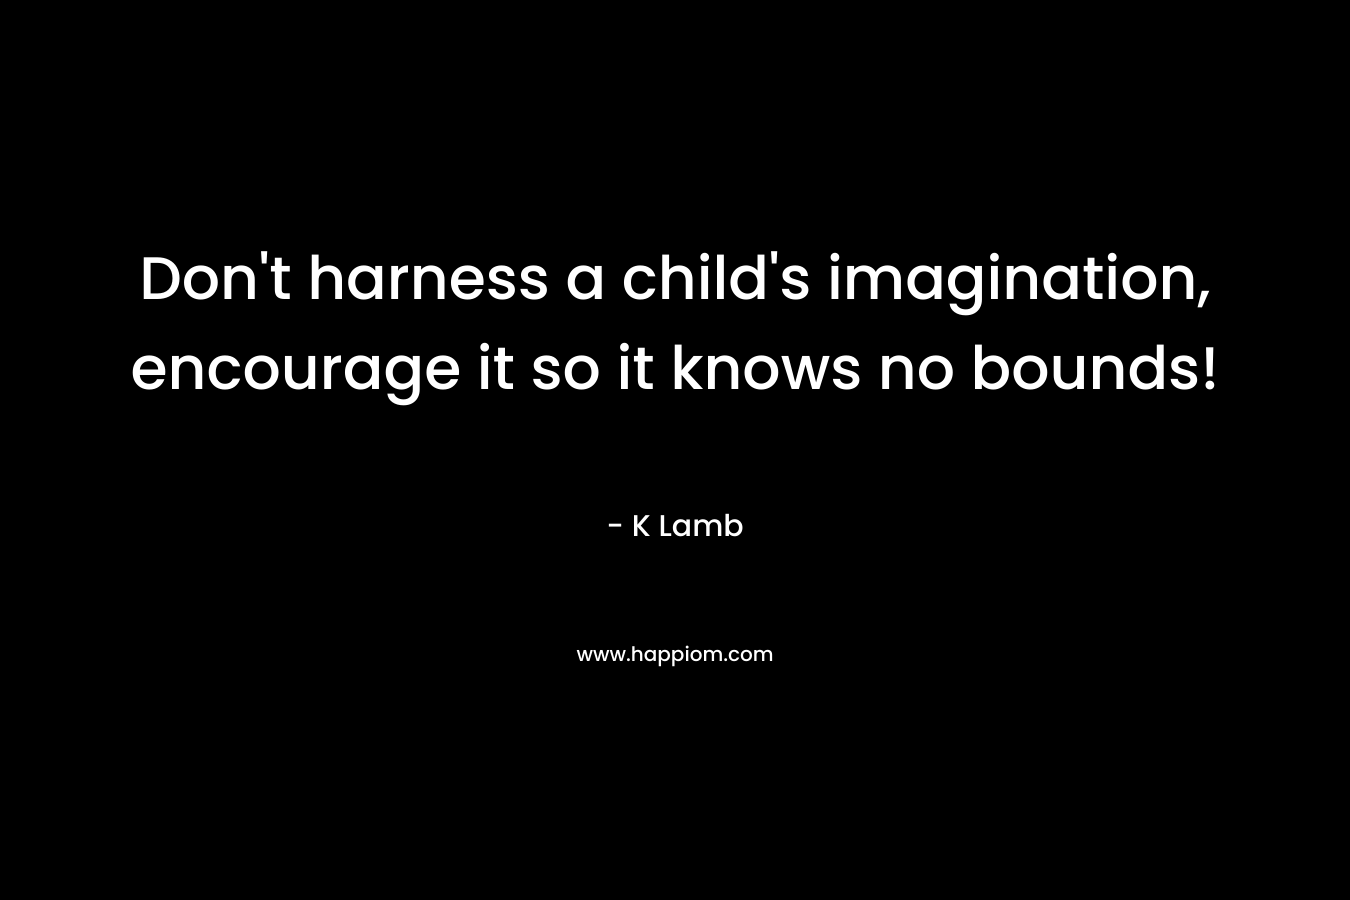 Don’t harness a child’s imagination, encourage it so it knows no bounds! – K Lamb